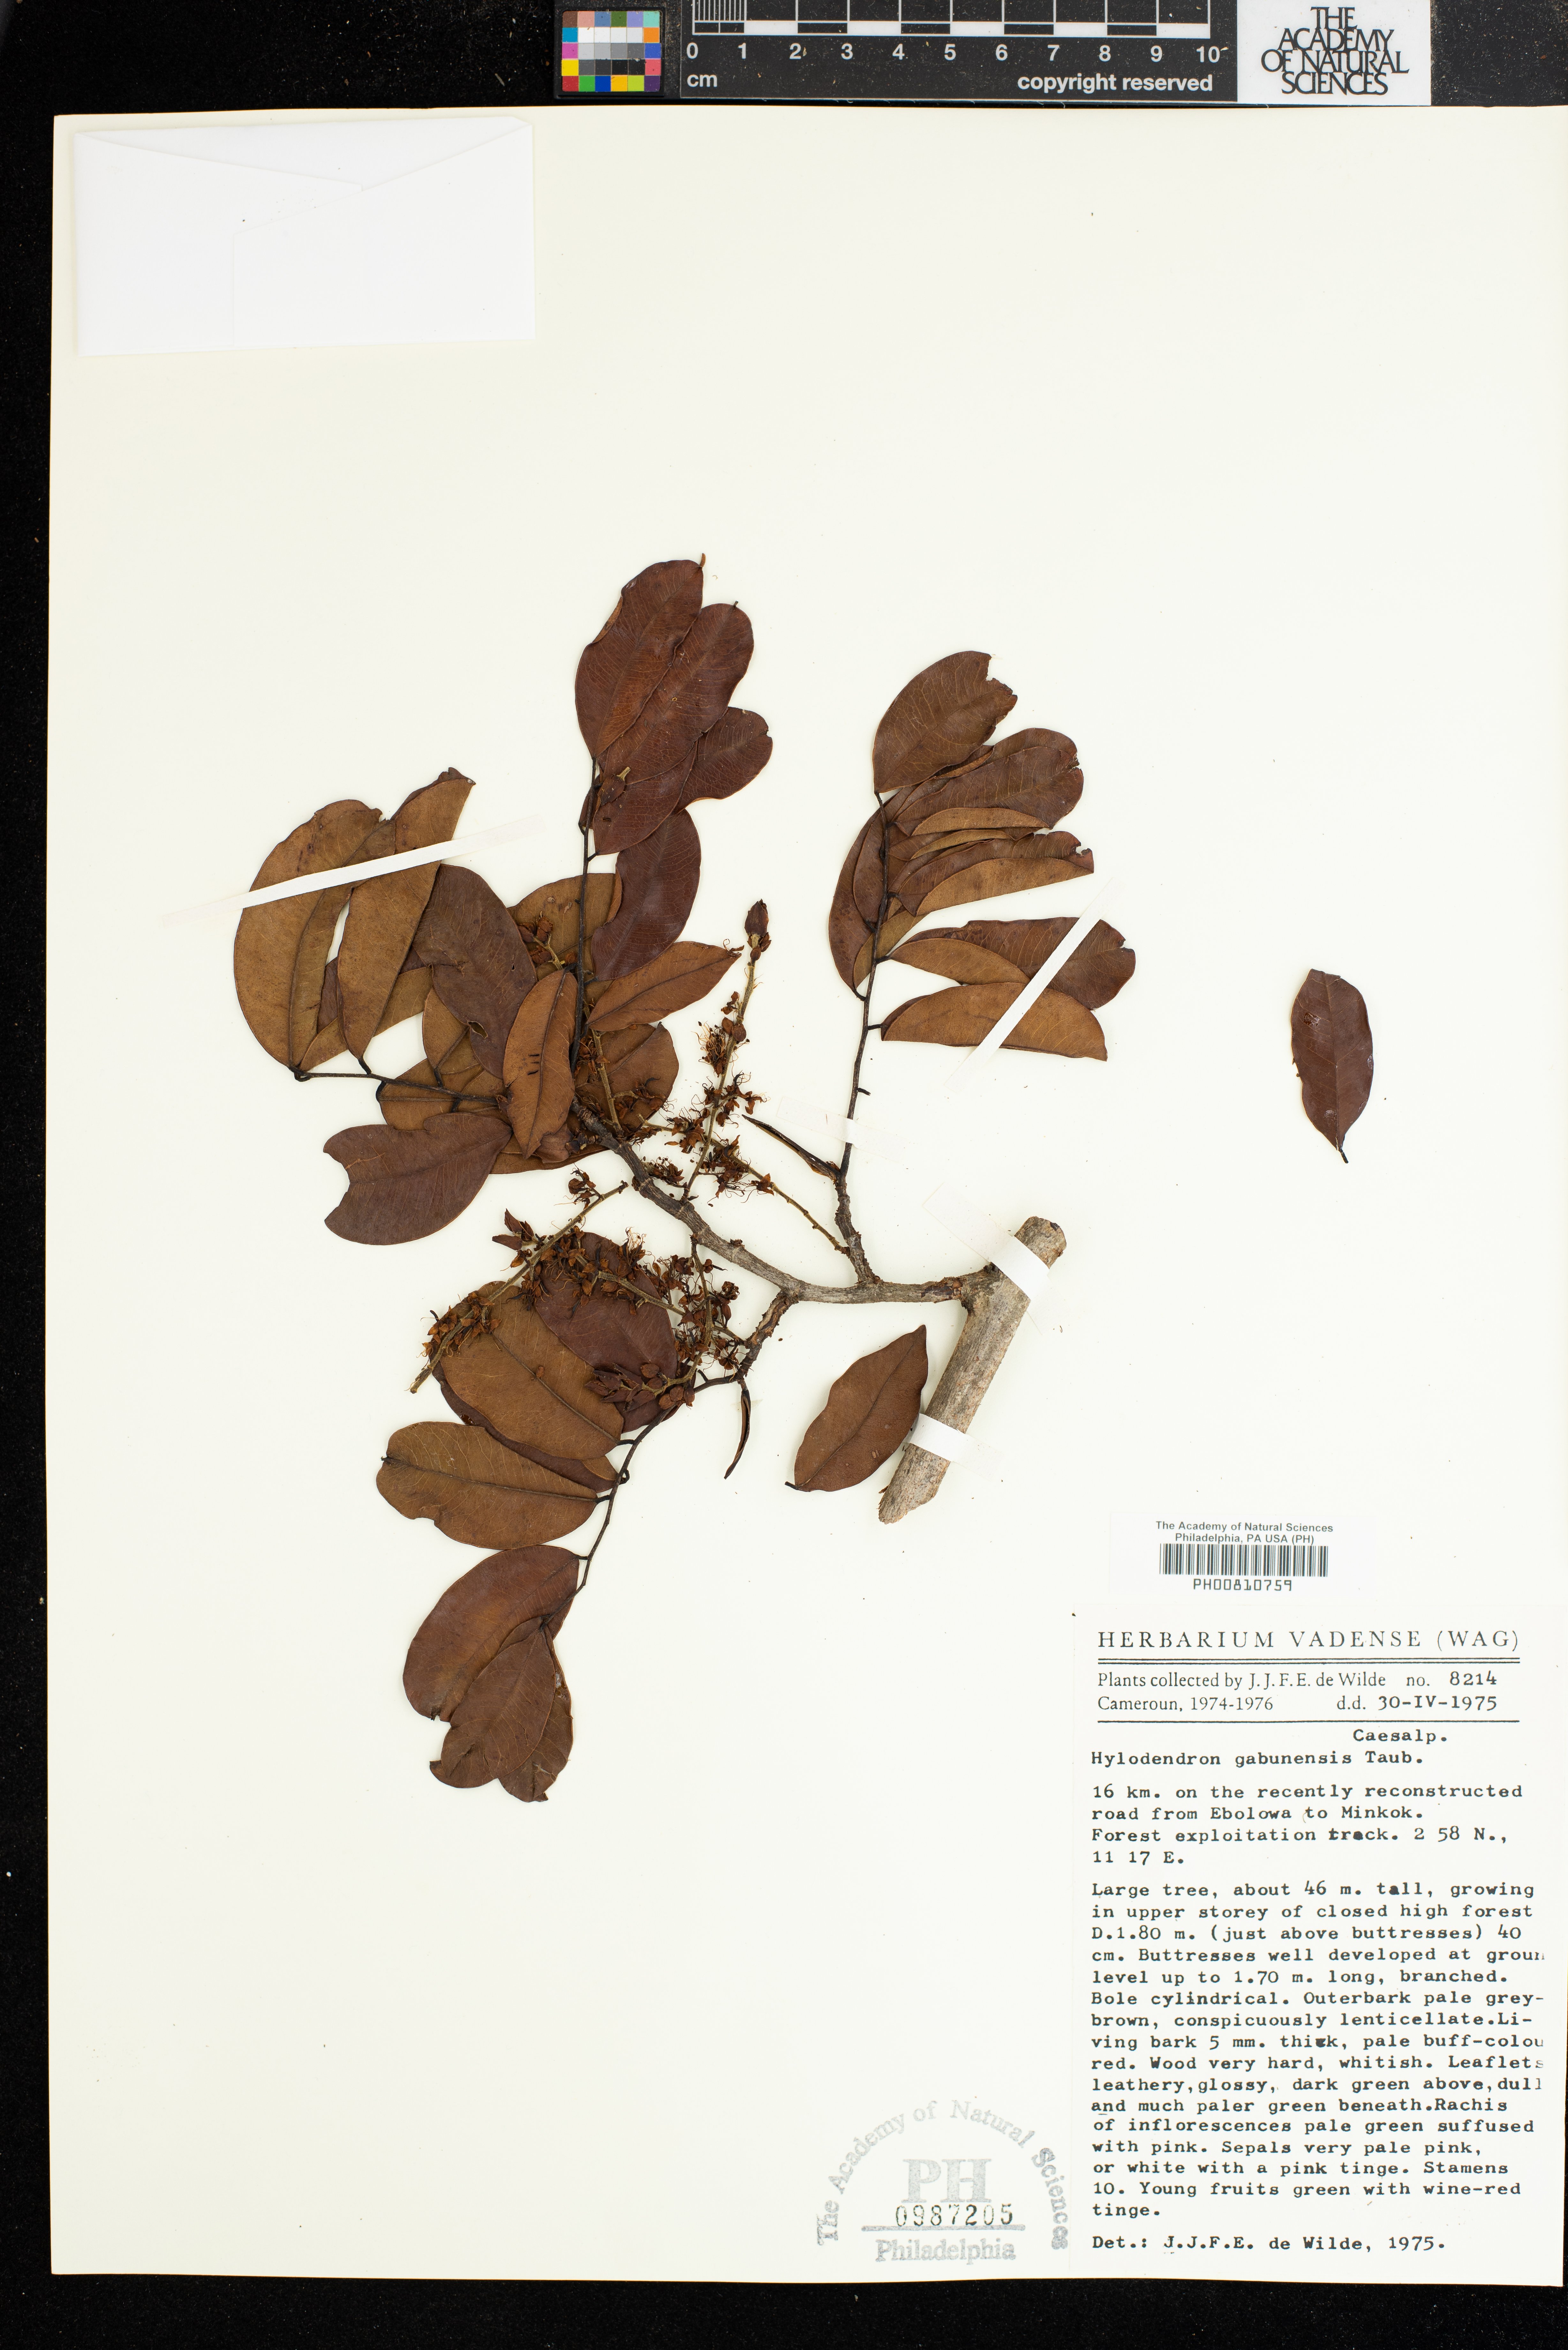 Hylodendron image